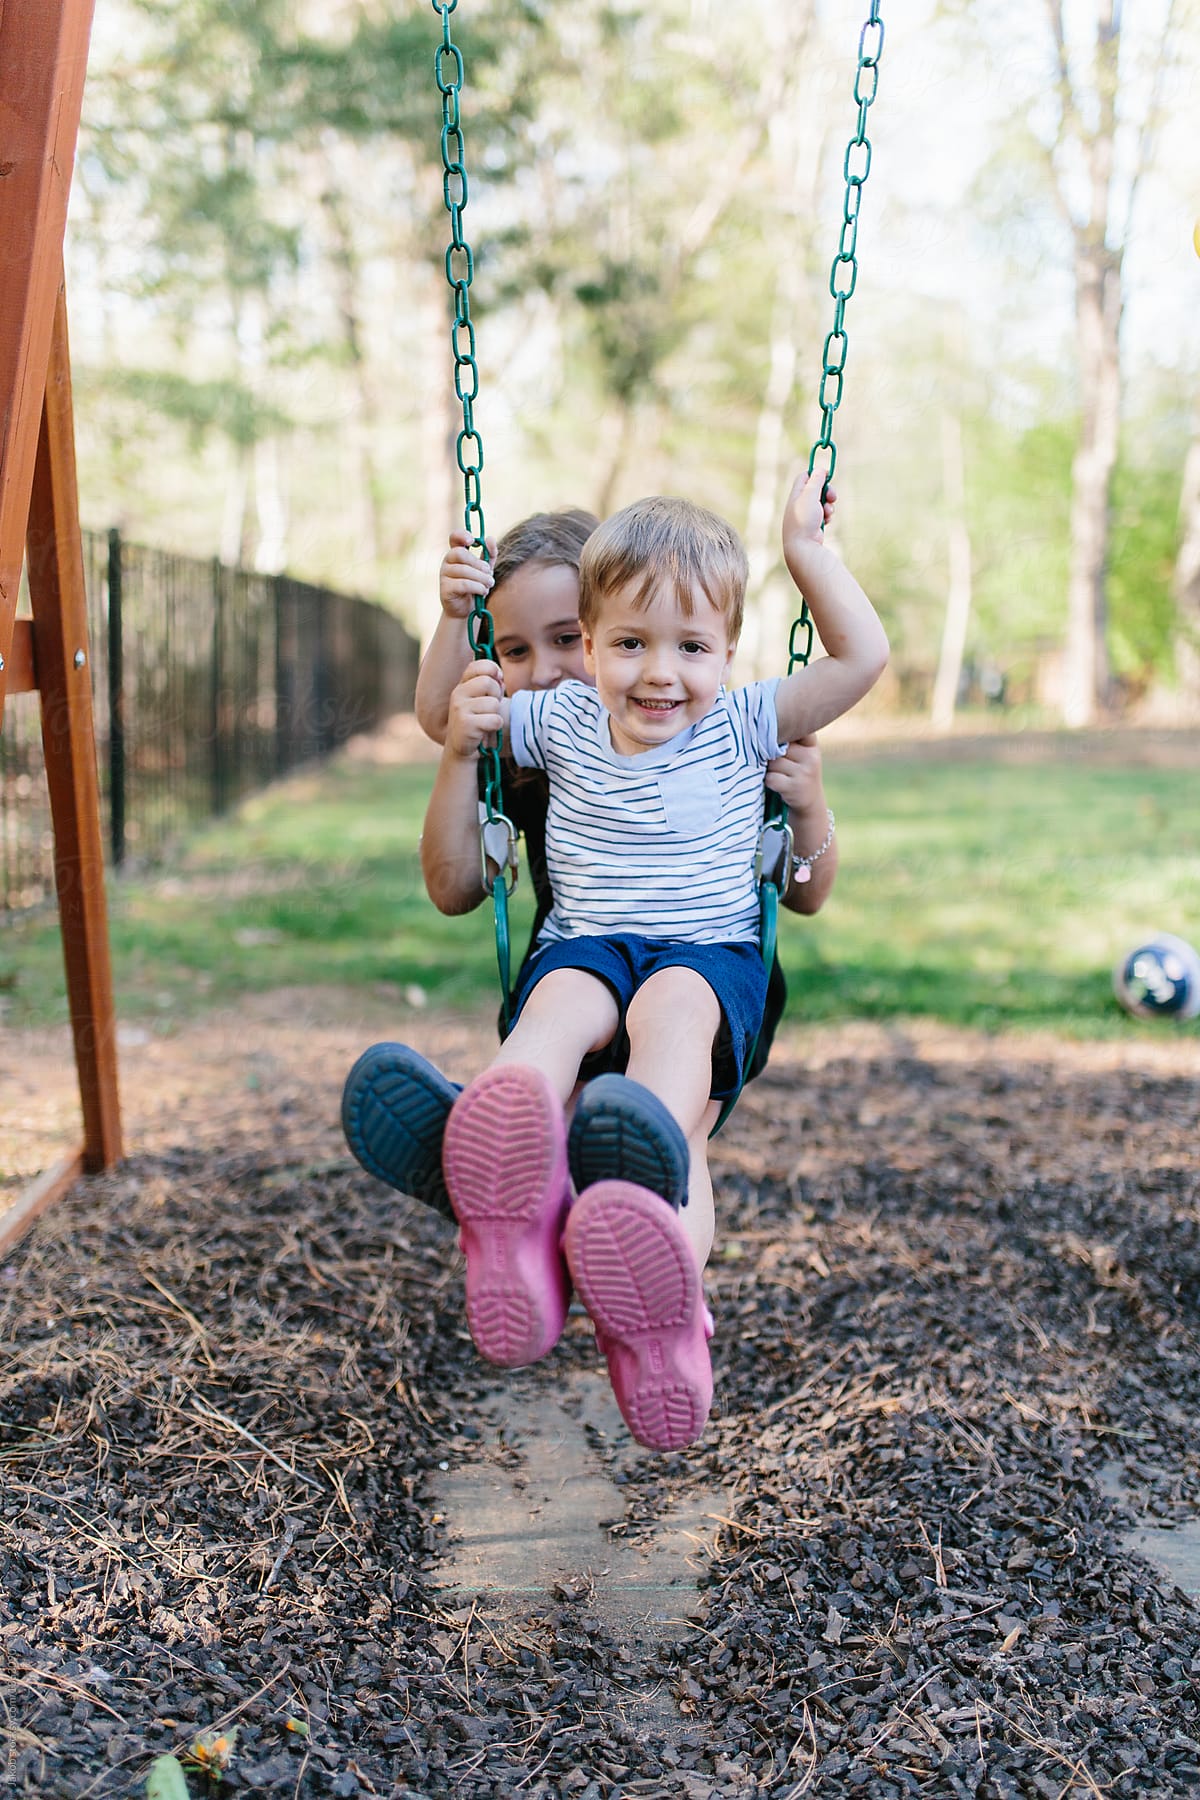 Brother And Sister Sitting On A Swing Together By Stocksy Contributor Jakob Lagerstedt Stocksy 